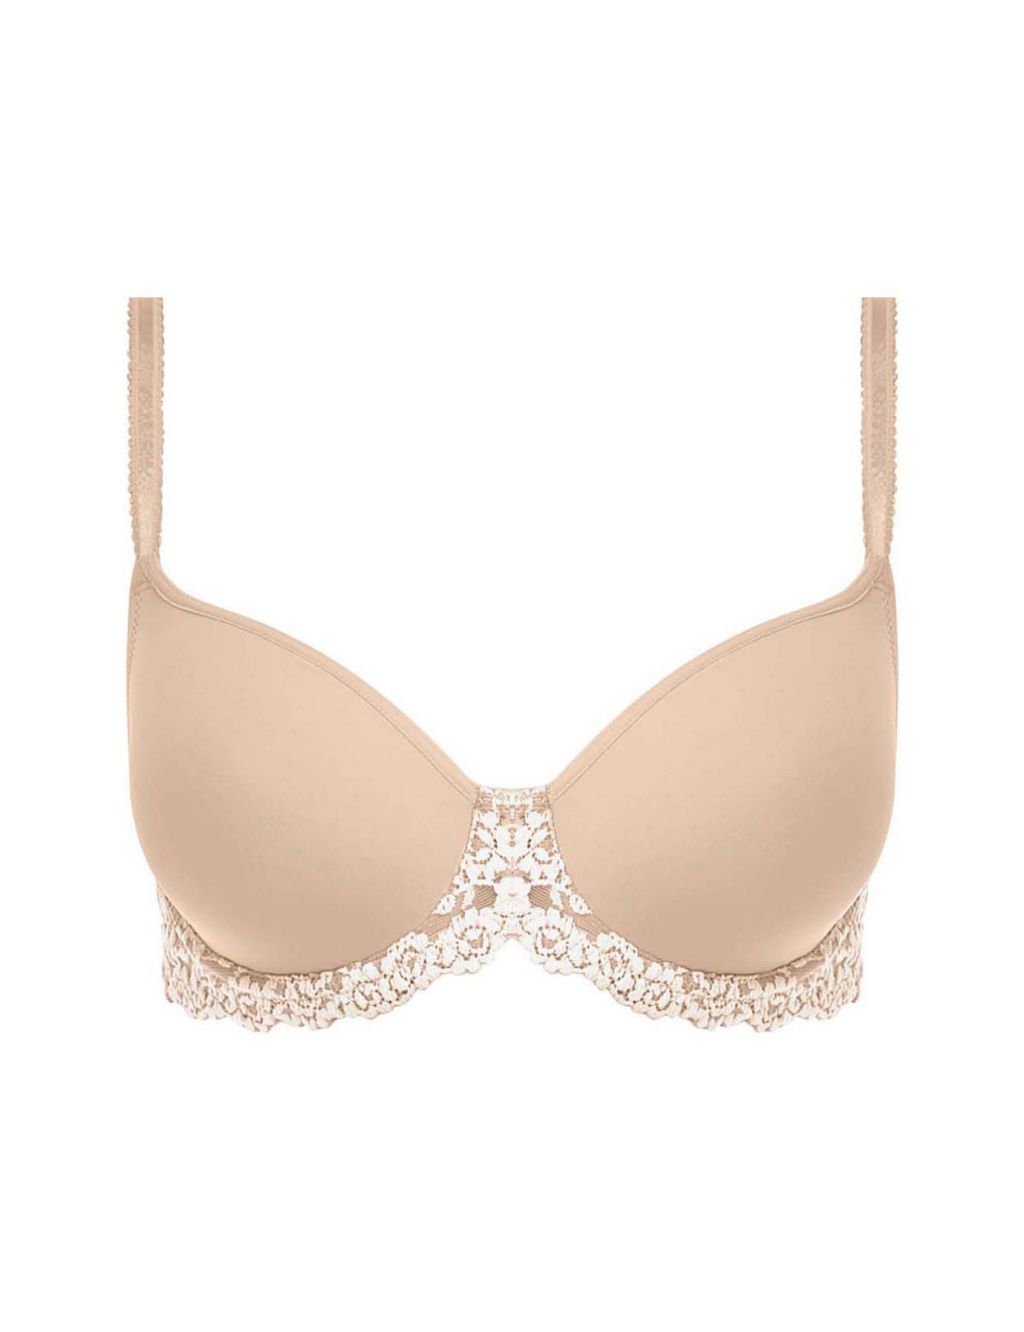 Embrace Floral Lace Wired T-Shirt Bra image 2